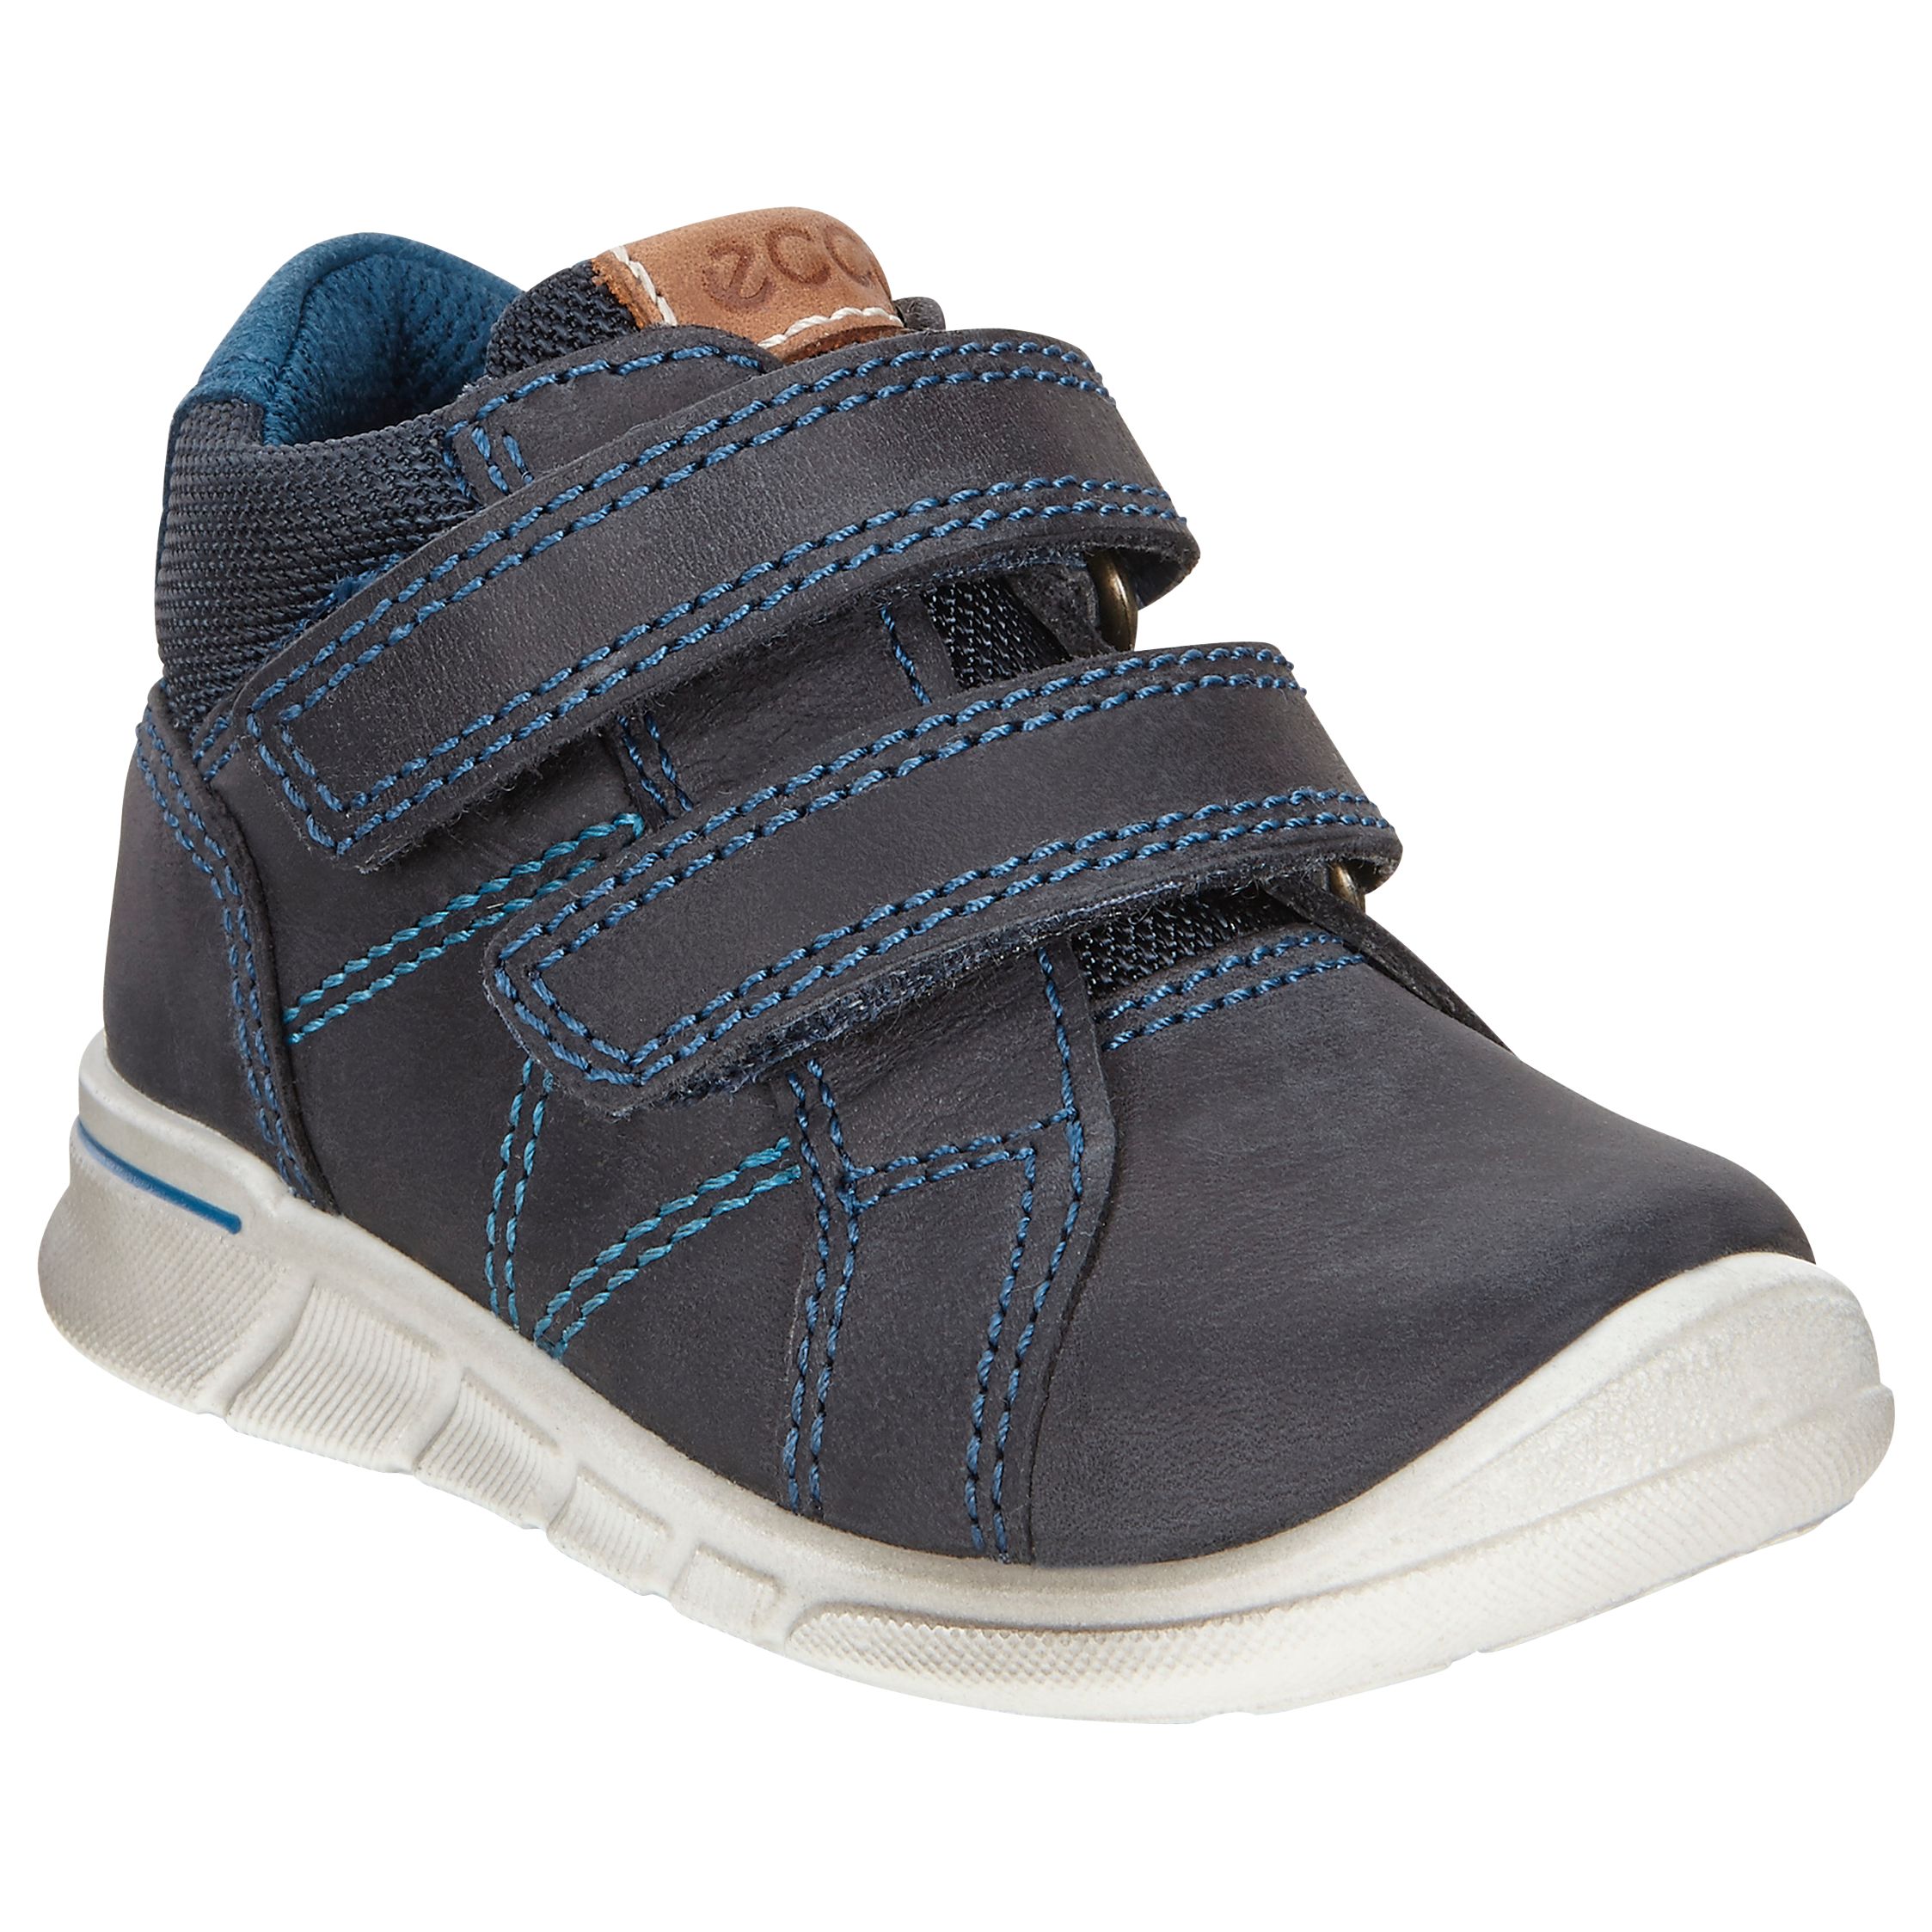 ECCO Children's Leather Riptape Logo First Shoes, Marine